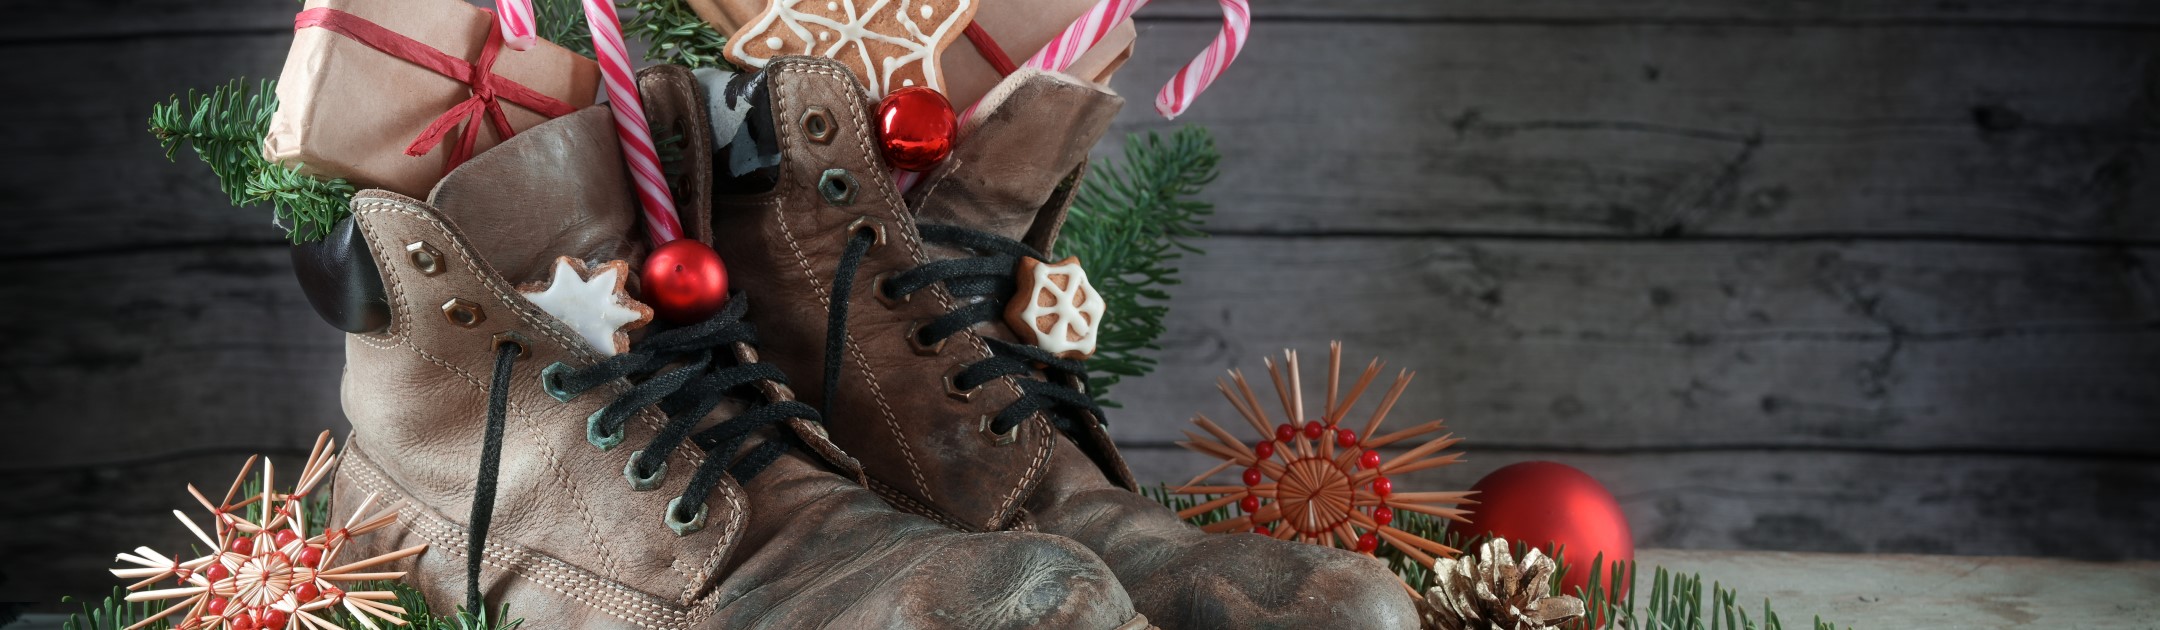 Cleaning your boots for St. Nicholas